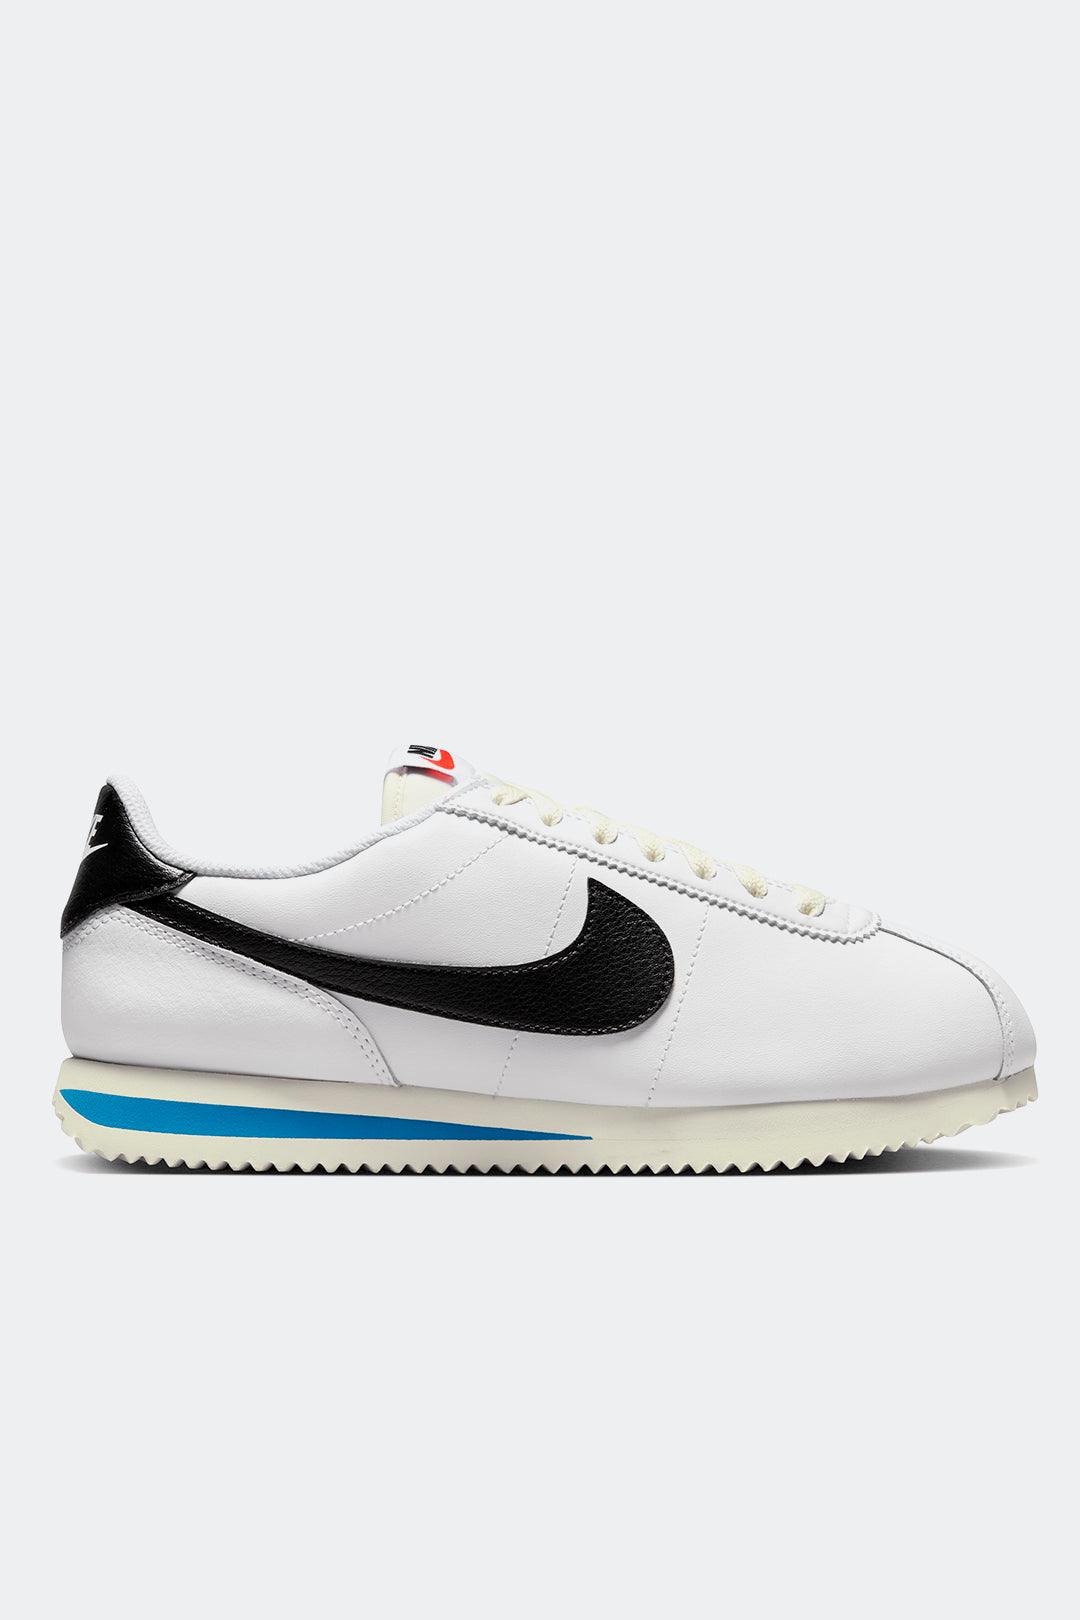 NIKE CORTEZ - MUJER - HYPE